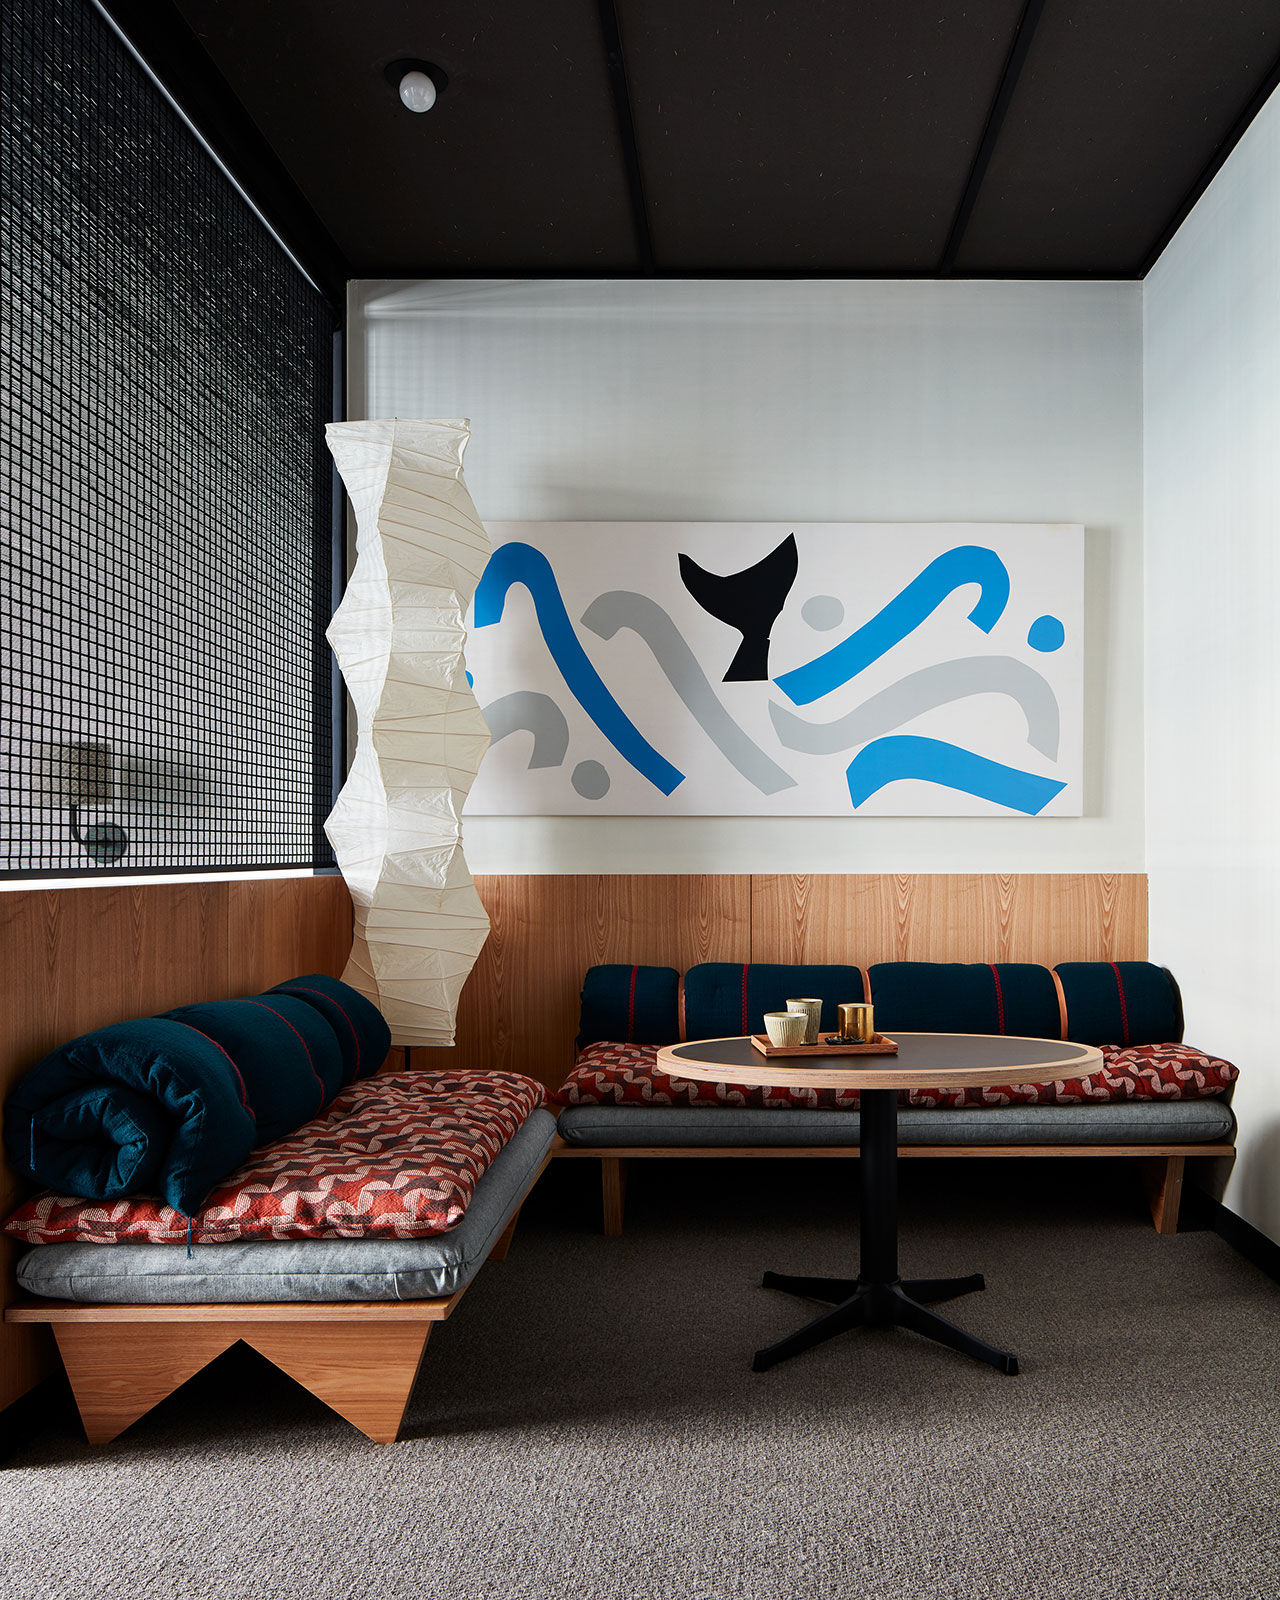 Ace Hotel Kyoto.
Guestroom.
Photo by Stephen Kent Johnson.